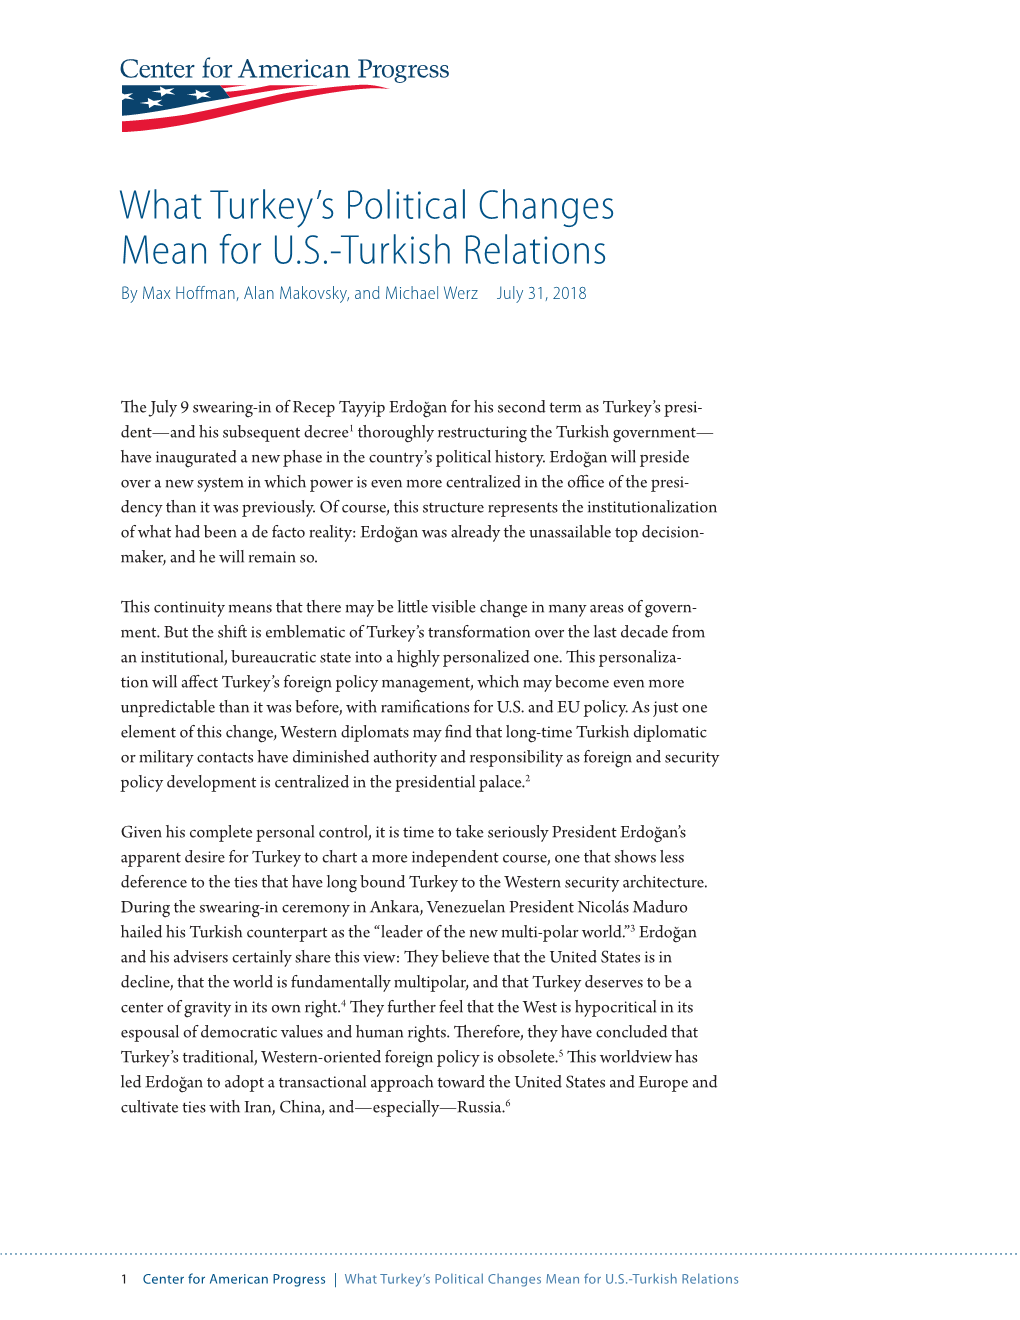 What Turkey's Political Changes Mean for U.S.-Turkish Relations